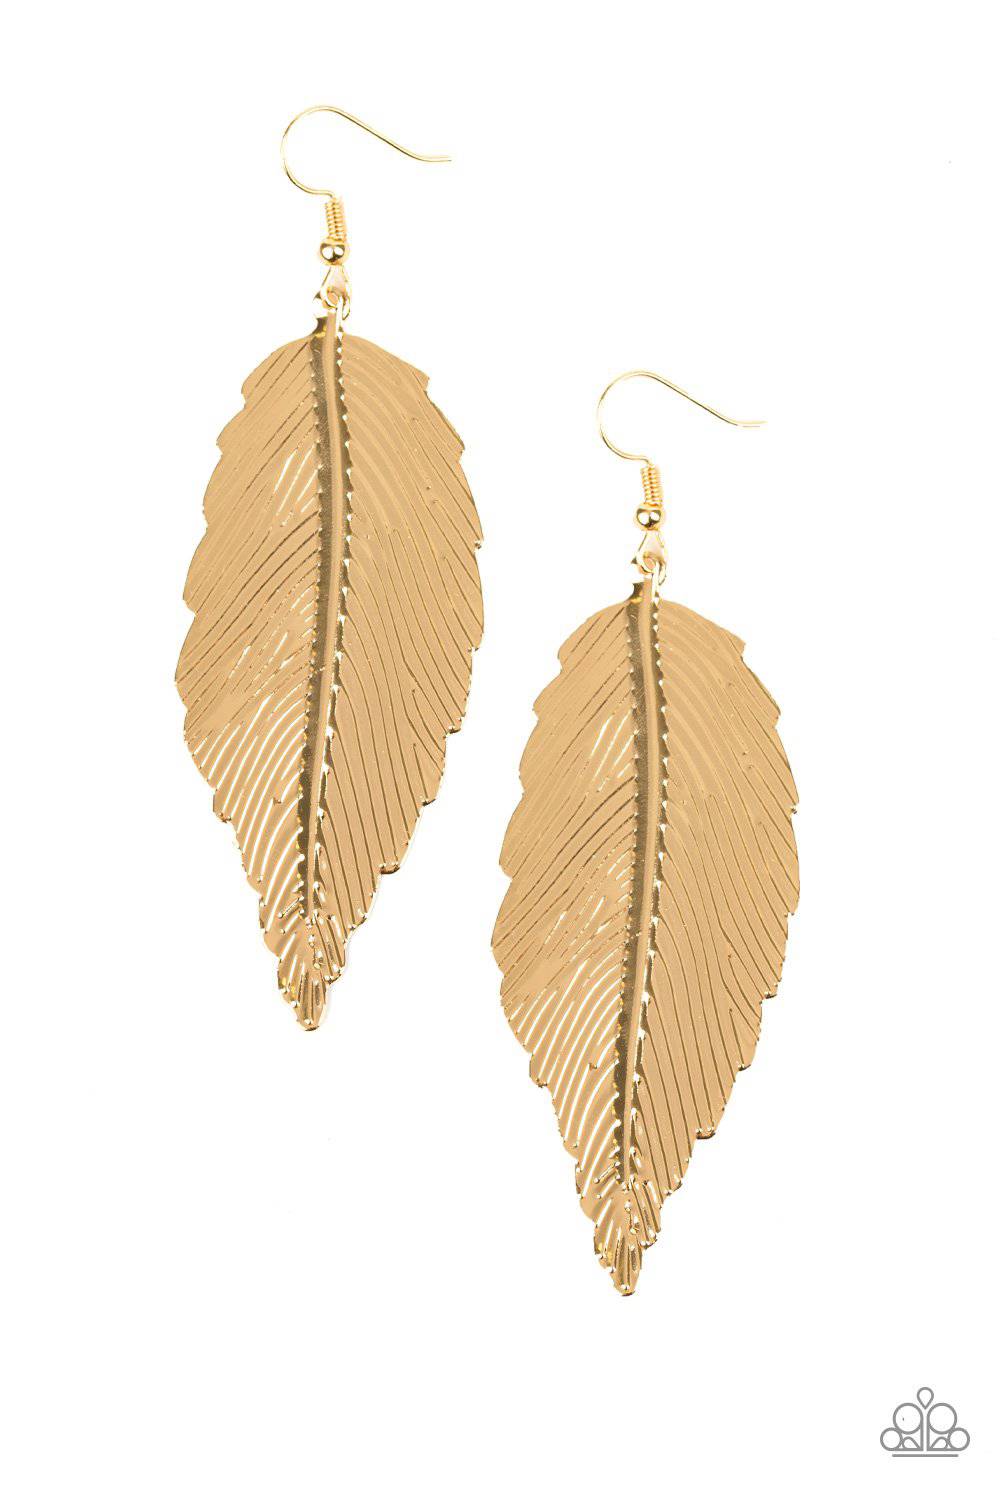 Lookin For A FLIGHT - Gold Feather Earrings - Paparazzi Accessories - GlaMarous Titi Jewels